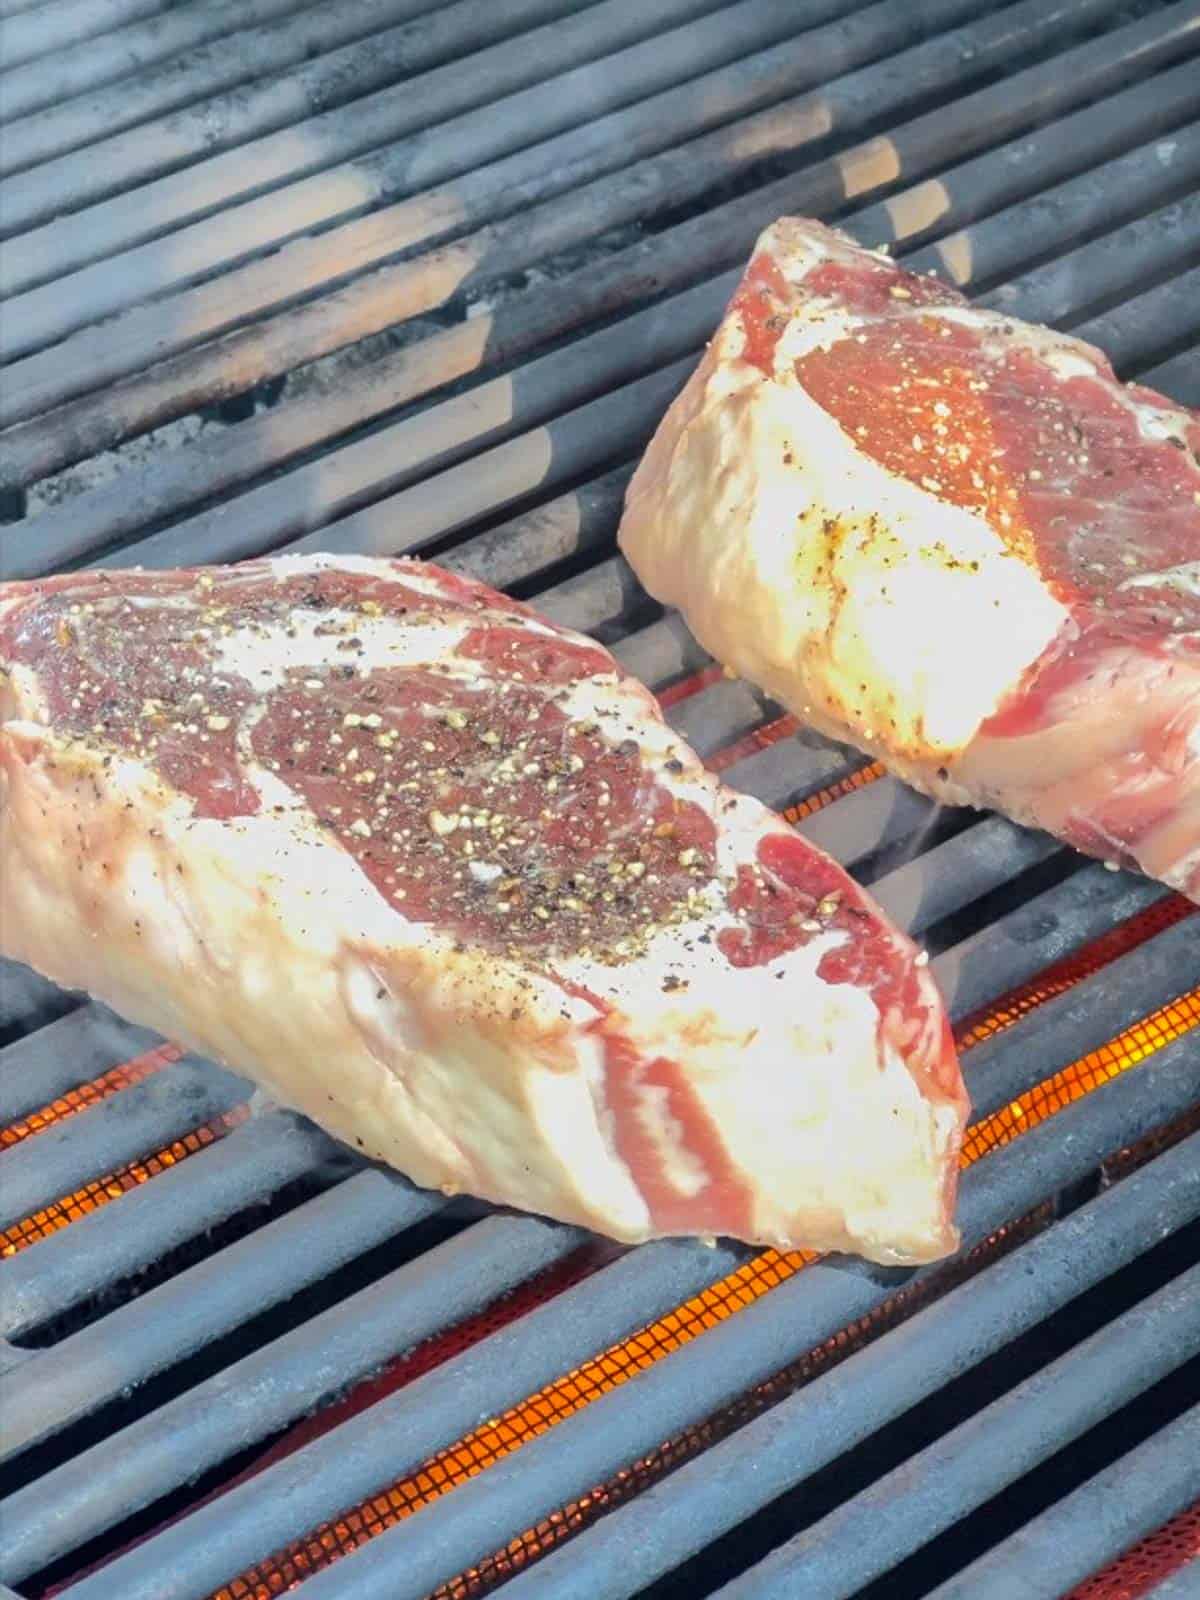 add the steaks to a hot grill